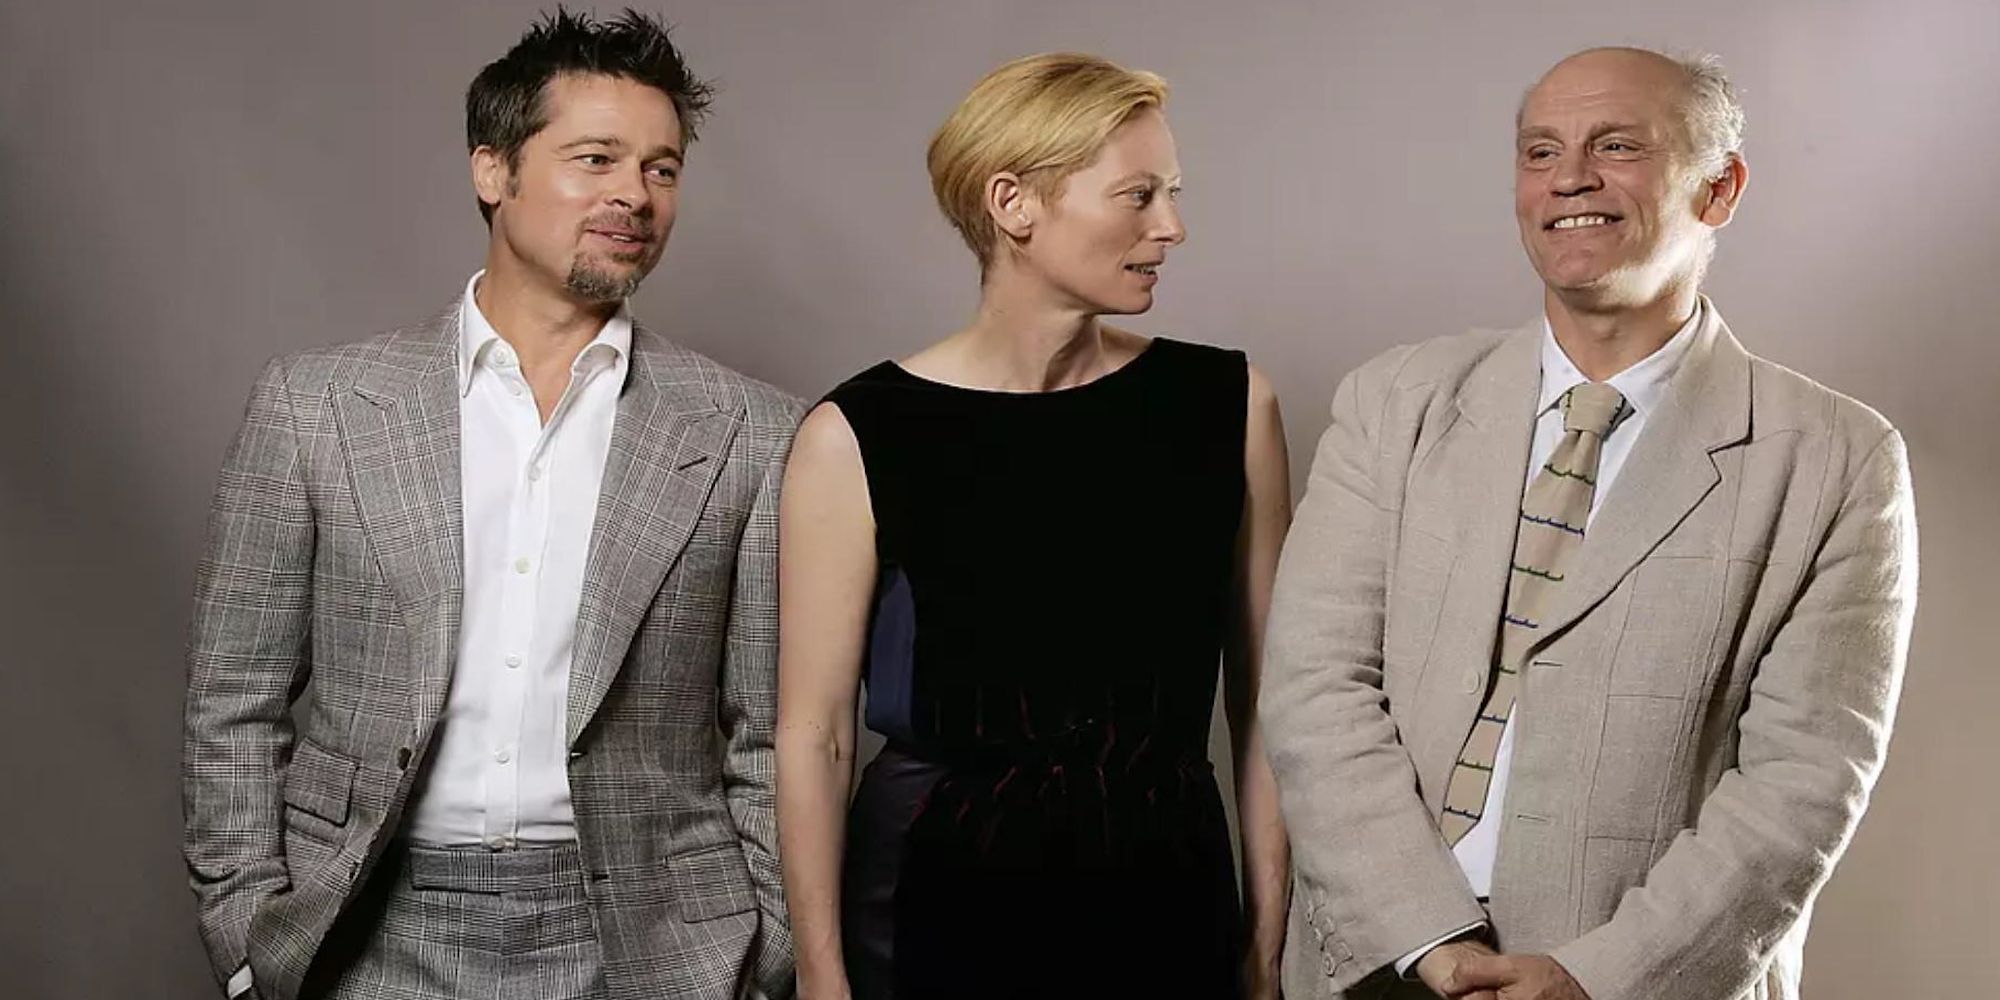 Burn After Reading Promotional Image, featuring from L to R: Brad Pitt, Tilda Swinton, and John Malkovich